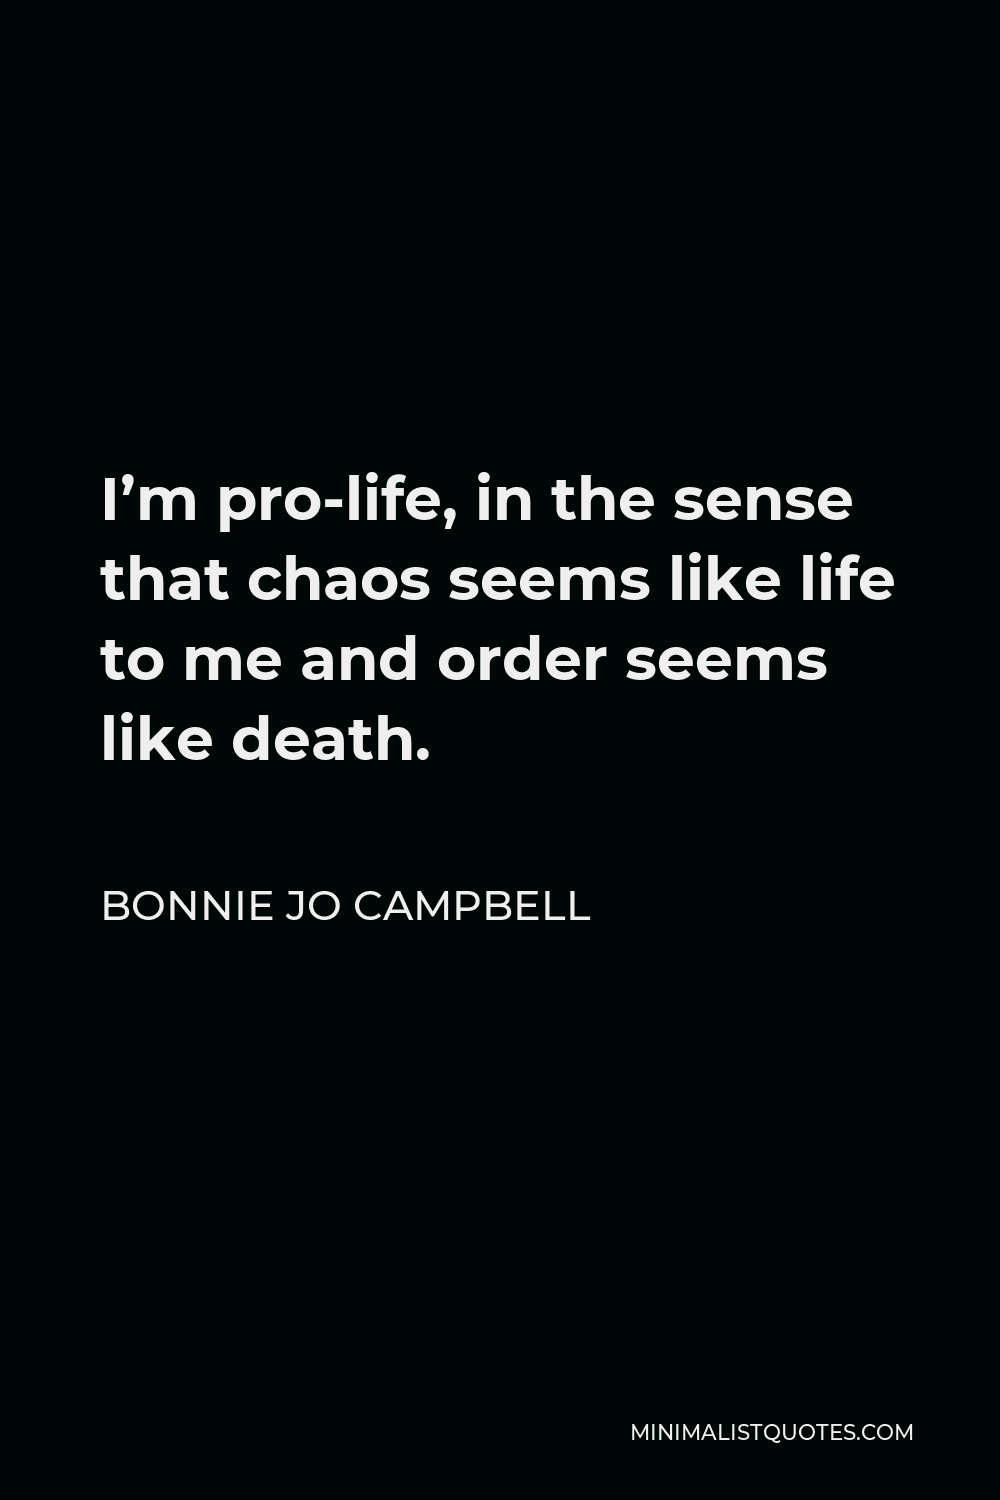 Bonnie Jo Campbell Quote - I’m pro-life, in the sense that chaos seems like life to me and order seems like death.